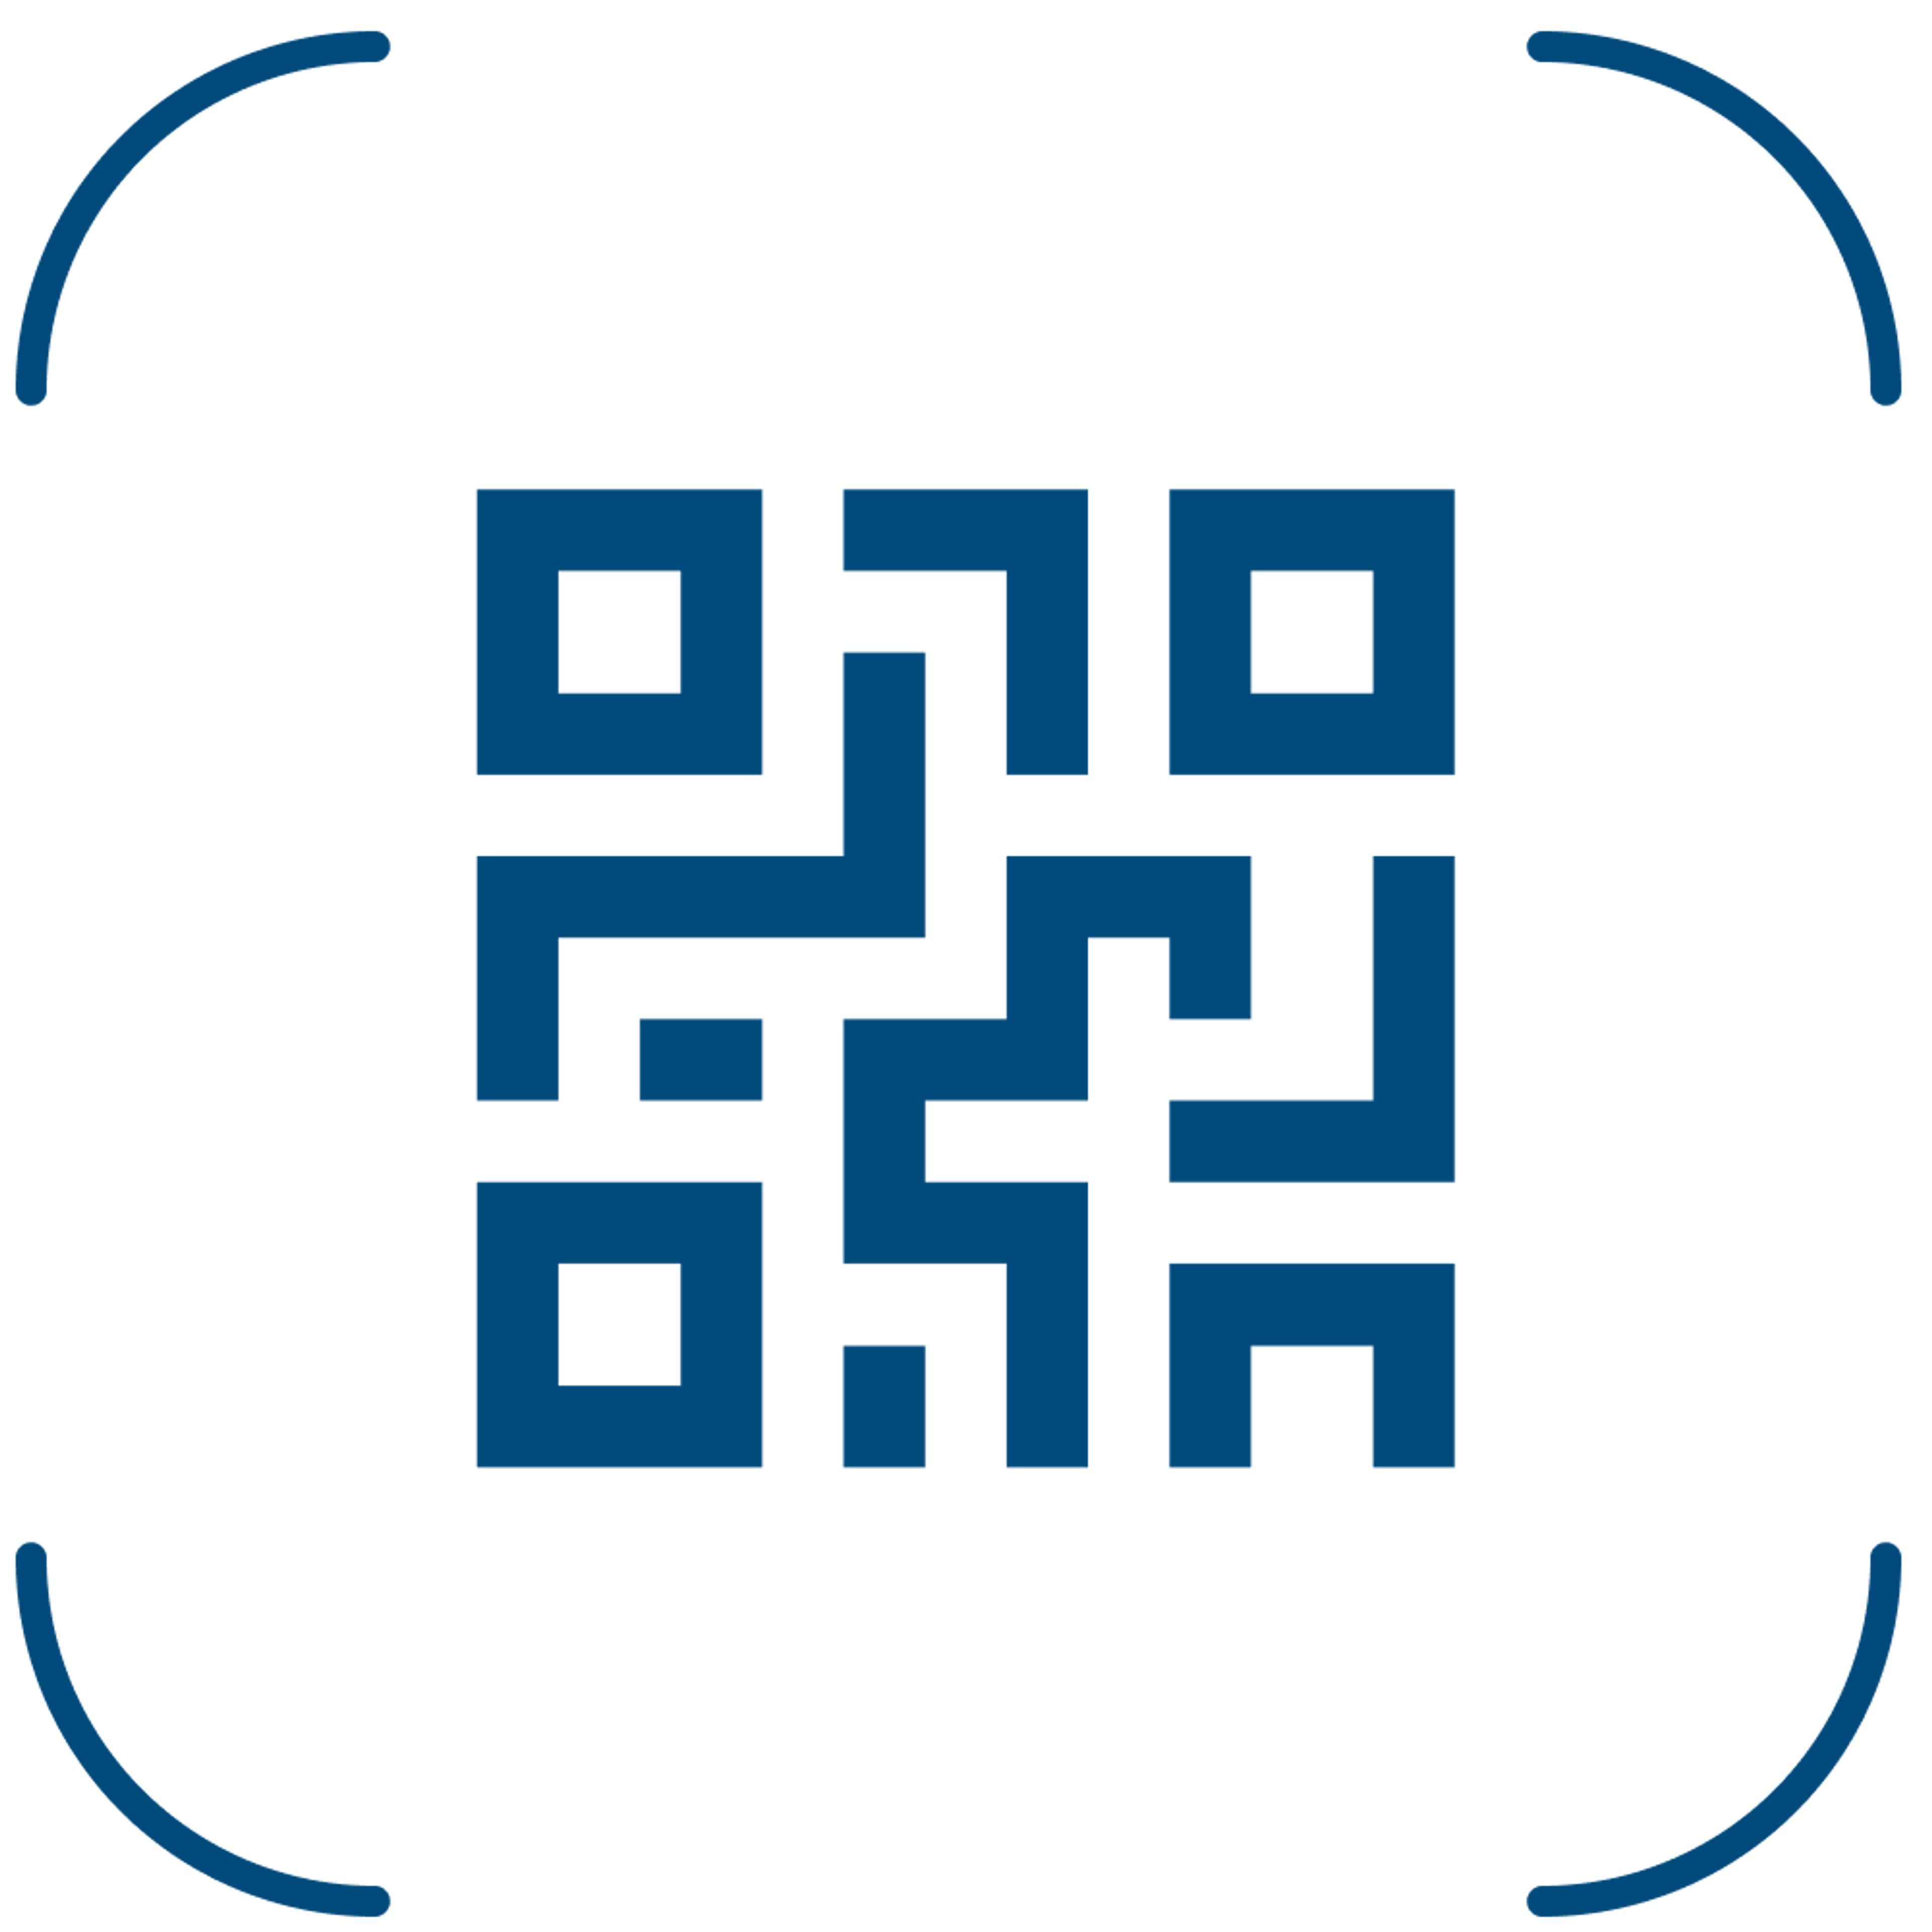 An icon depicting a QR code being selected